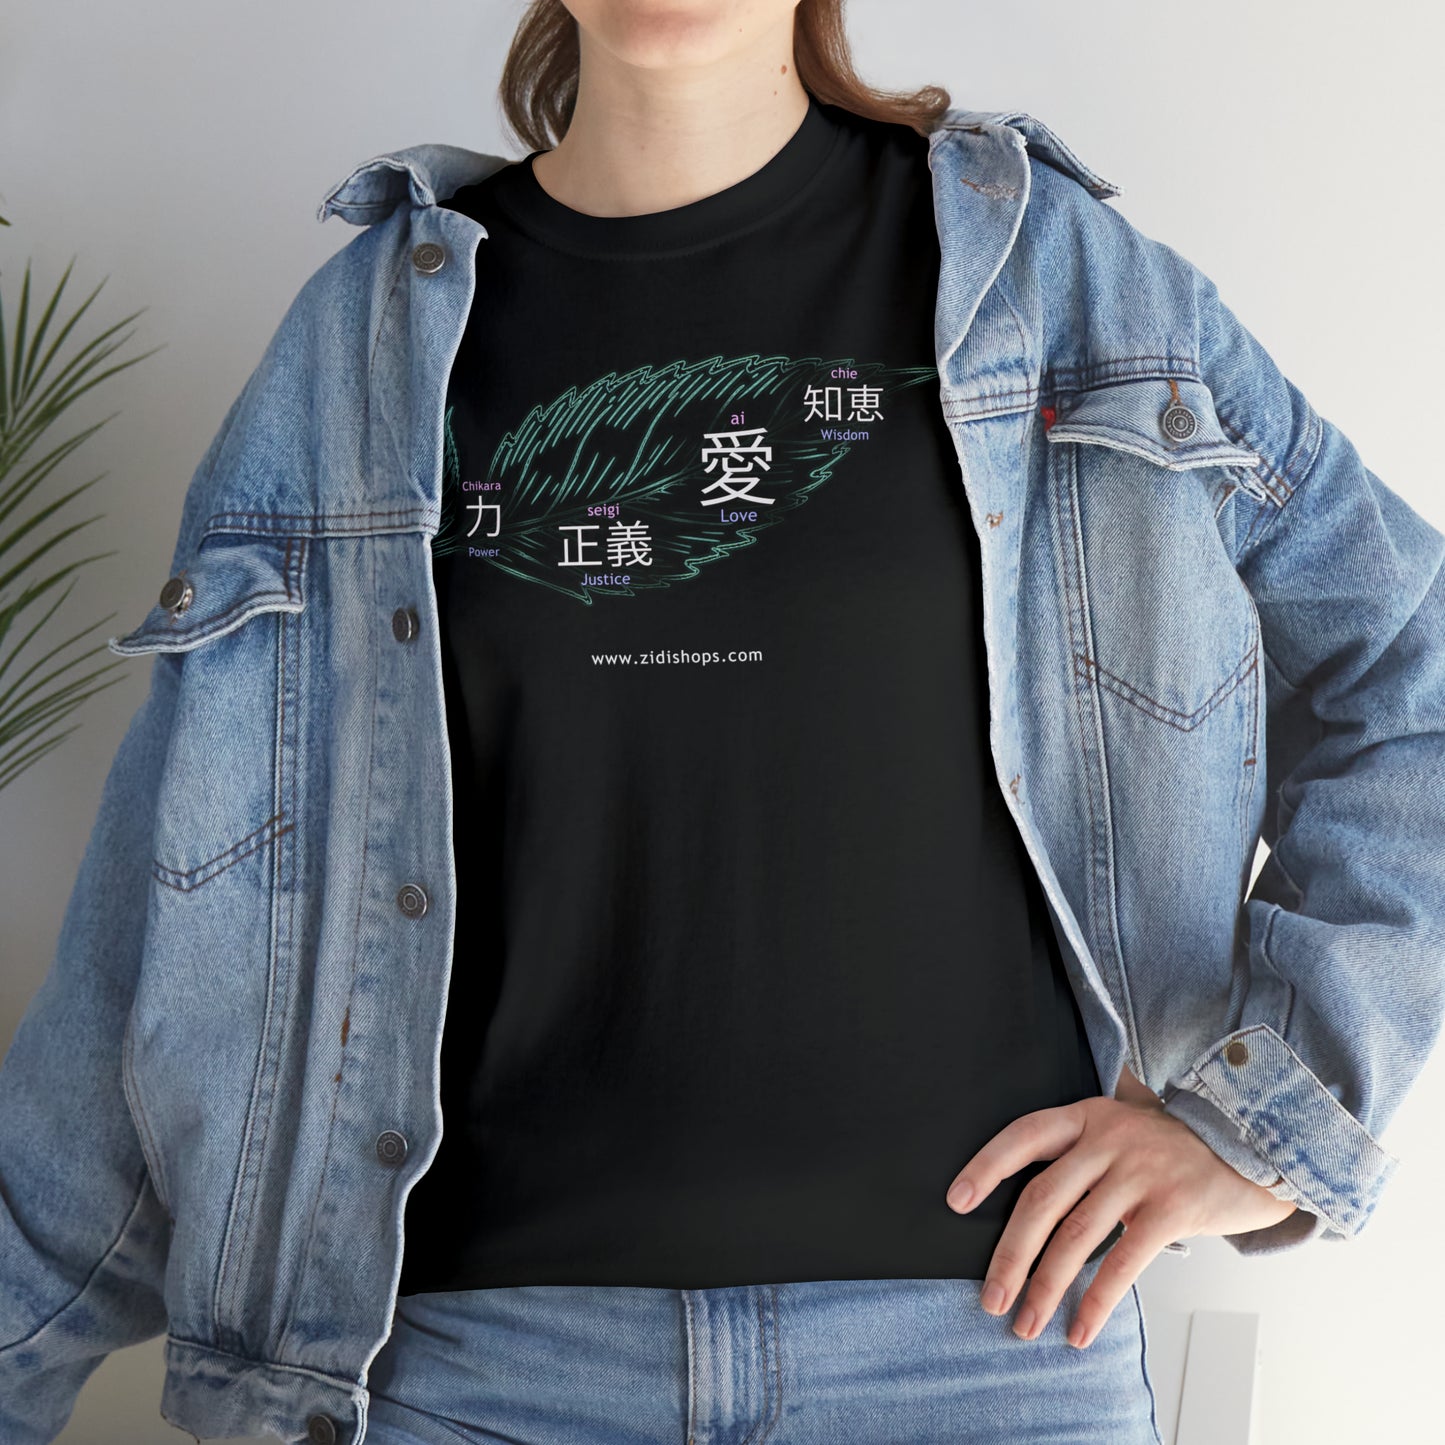 Japanese/English Unisex Heavy Cotton Tee, Power, justice, love, wisdom, Japanese, spun fibers provide a smooth surface, no itchy interruptions under the arms